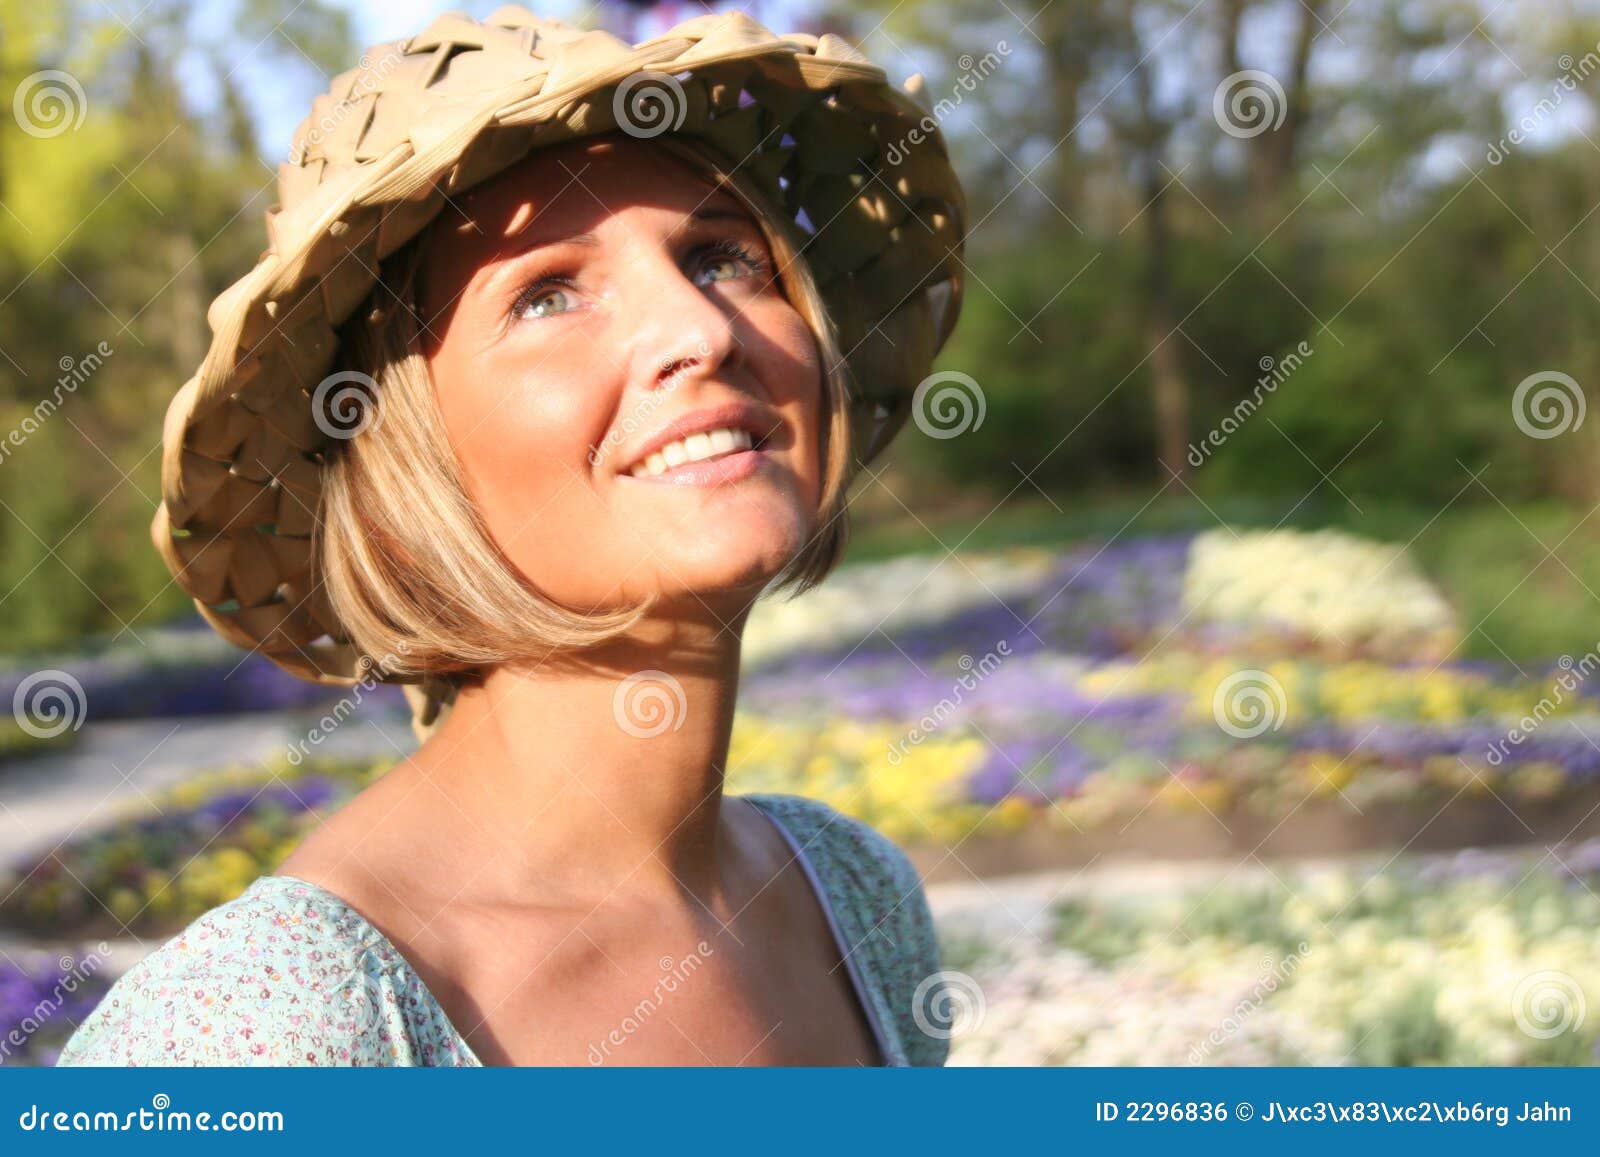 http://thumbs.dreamstime.com/z/happy-woman-nature-2296836.jpg